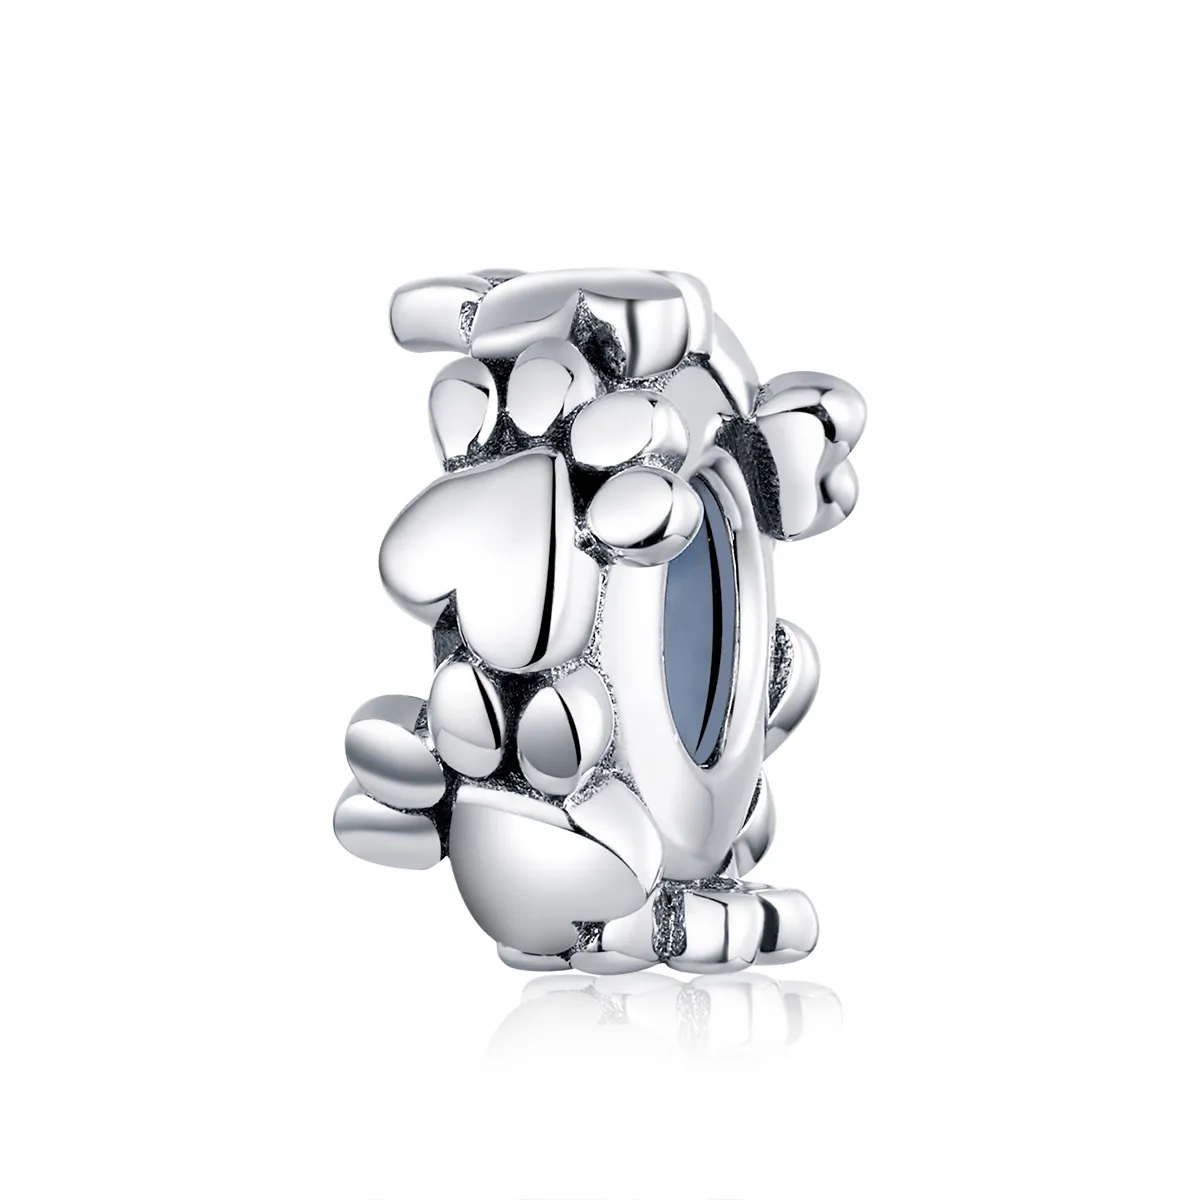 Pandora Style Silver Sweet Hearts Spacer Charm - SCC1504